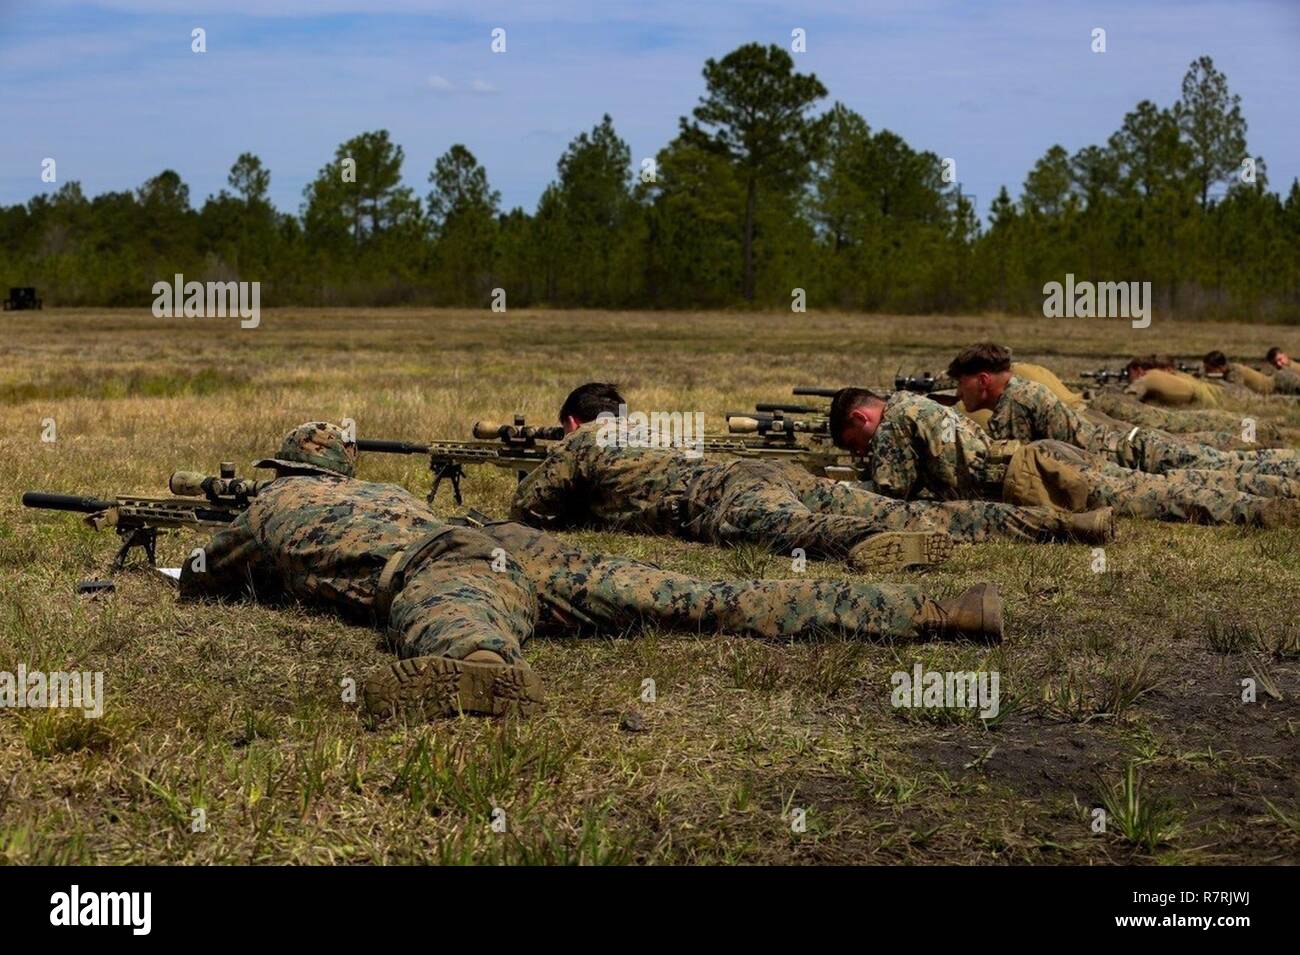 Marines aim and fire M40A6 rifles during an urban sniper course at Camp Lejeune, N.C., March 30, 2017. The Marines practiced engaging targets from unknown distances to maintain their skills on the weapon. The course, taught by Expeditionary Operations Training Group, includes Marines from 2nd Battalion, 6th Marine Regiment, 2nd Reconnaissance Battalion and School of Infantry-East. Stock Photo